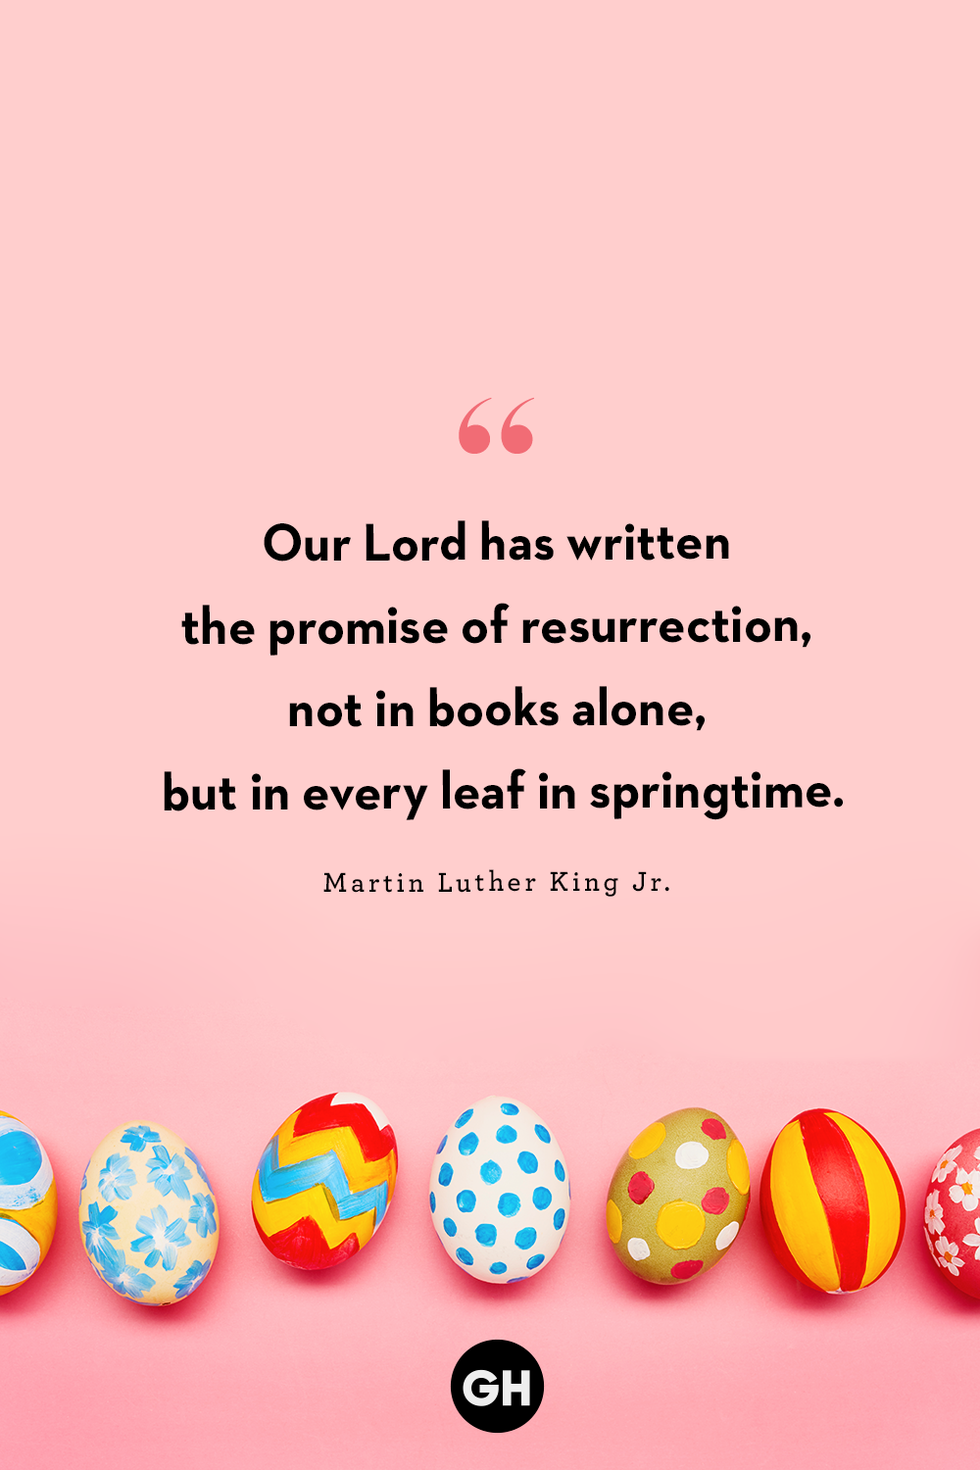 "our lord has written the promise of resurrection, not in books alone, but in every leaf in springtime" – martin luther king jr